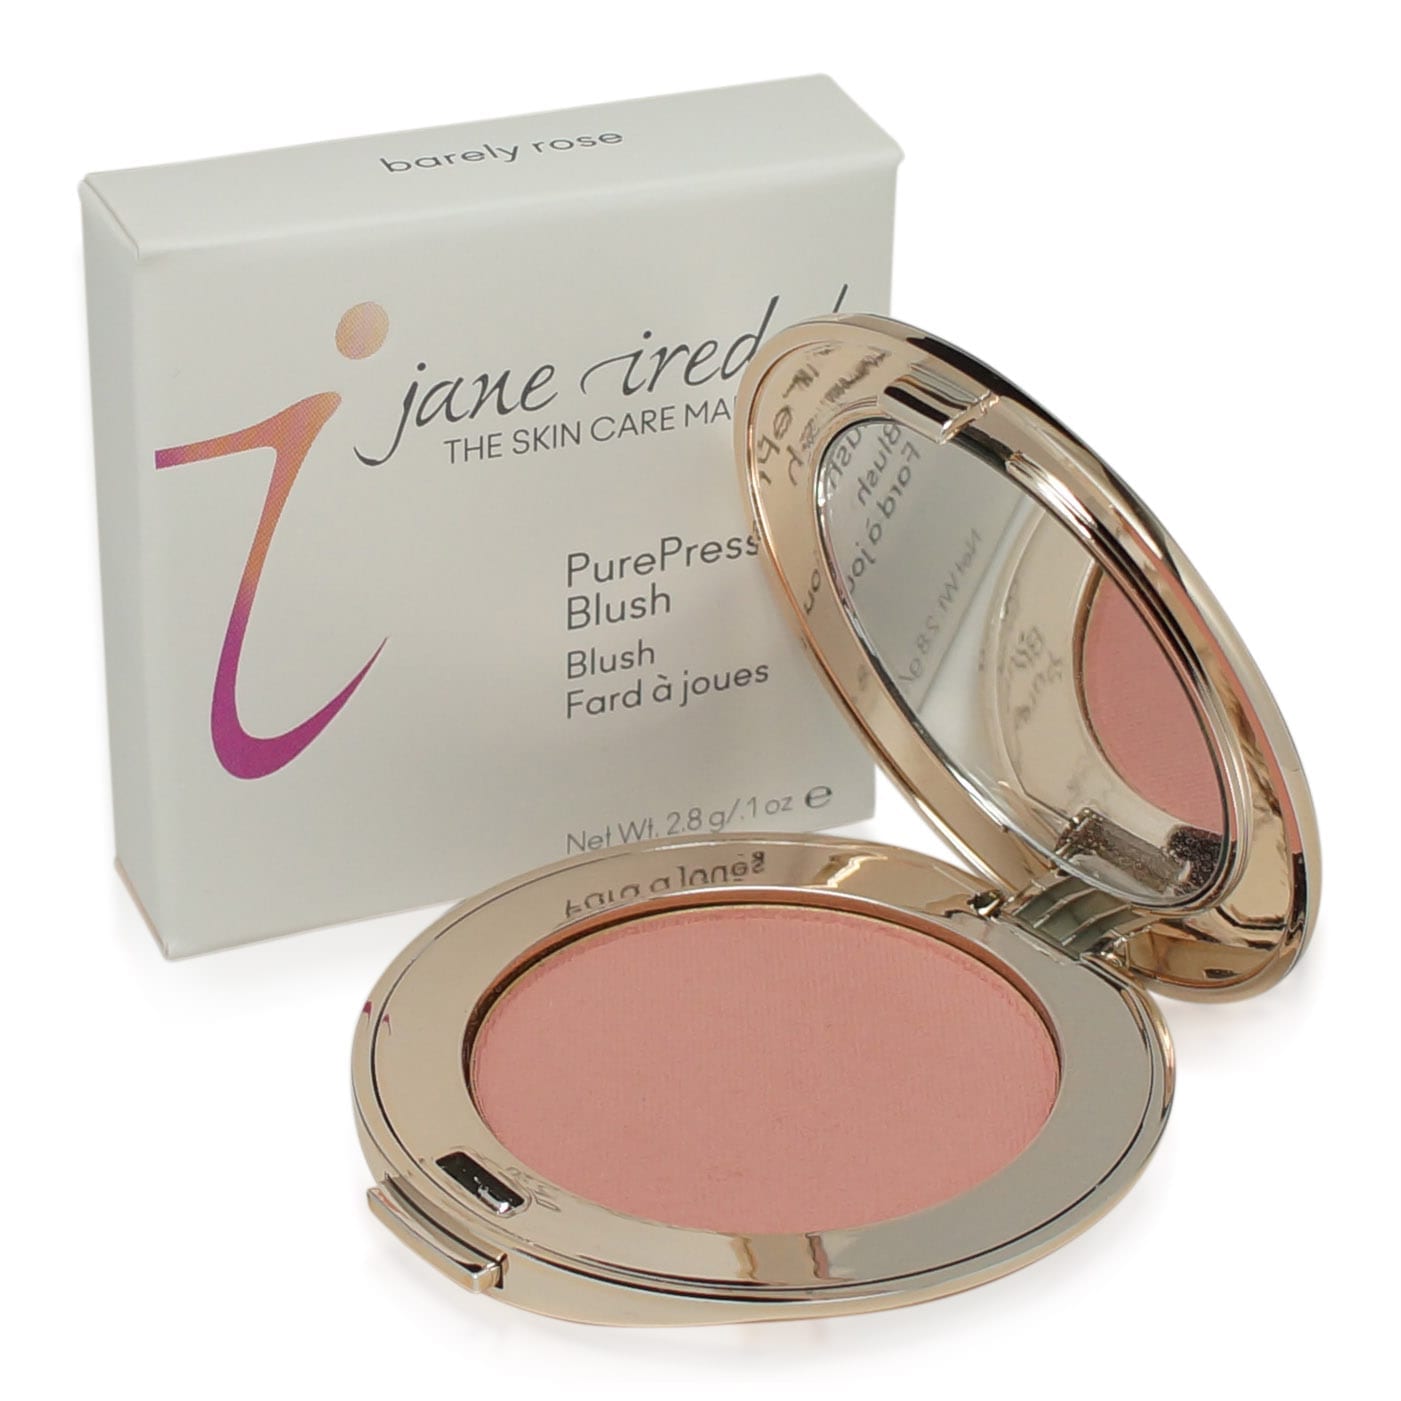 How To Choose a vibrant color blush like jane iredale PurePressed  